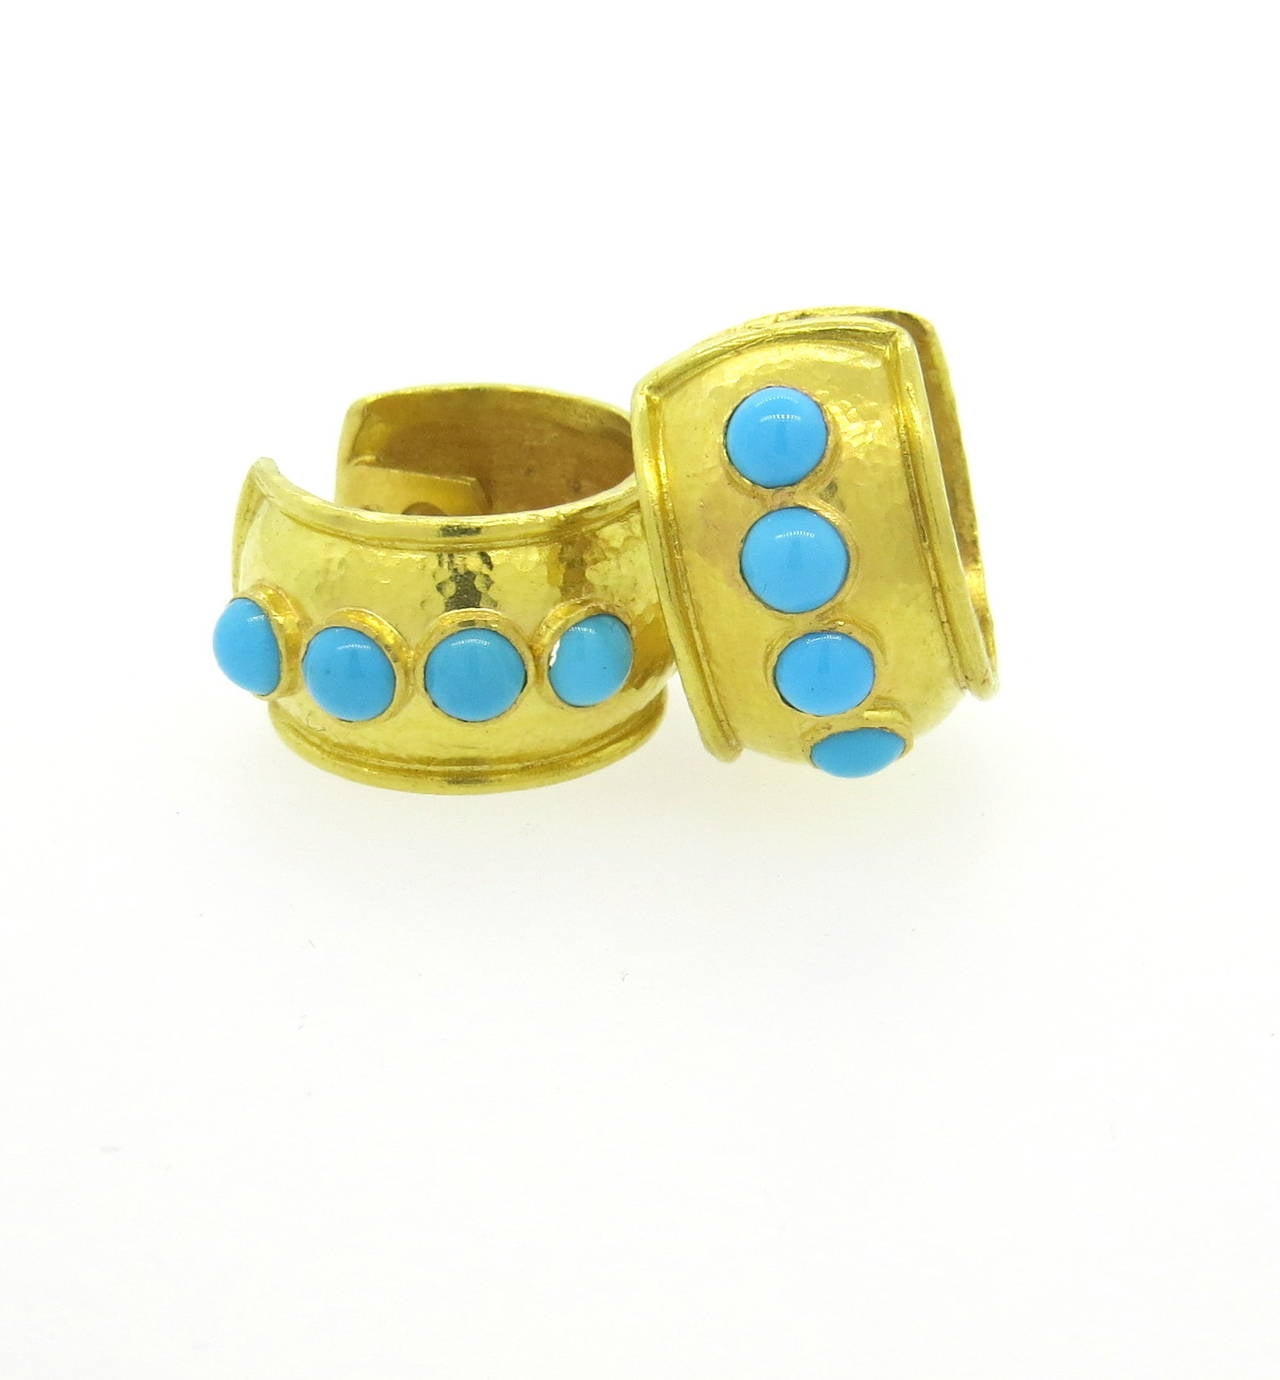 A pair of 19k yellow gold earrings set with turquoise cabochons.  Crafted by Elizabeth Locke as part of her Amalfi collection, the earrings measure 19mm x 12mm and weigh 15 grams.  They currently retail for $4695.